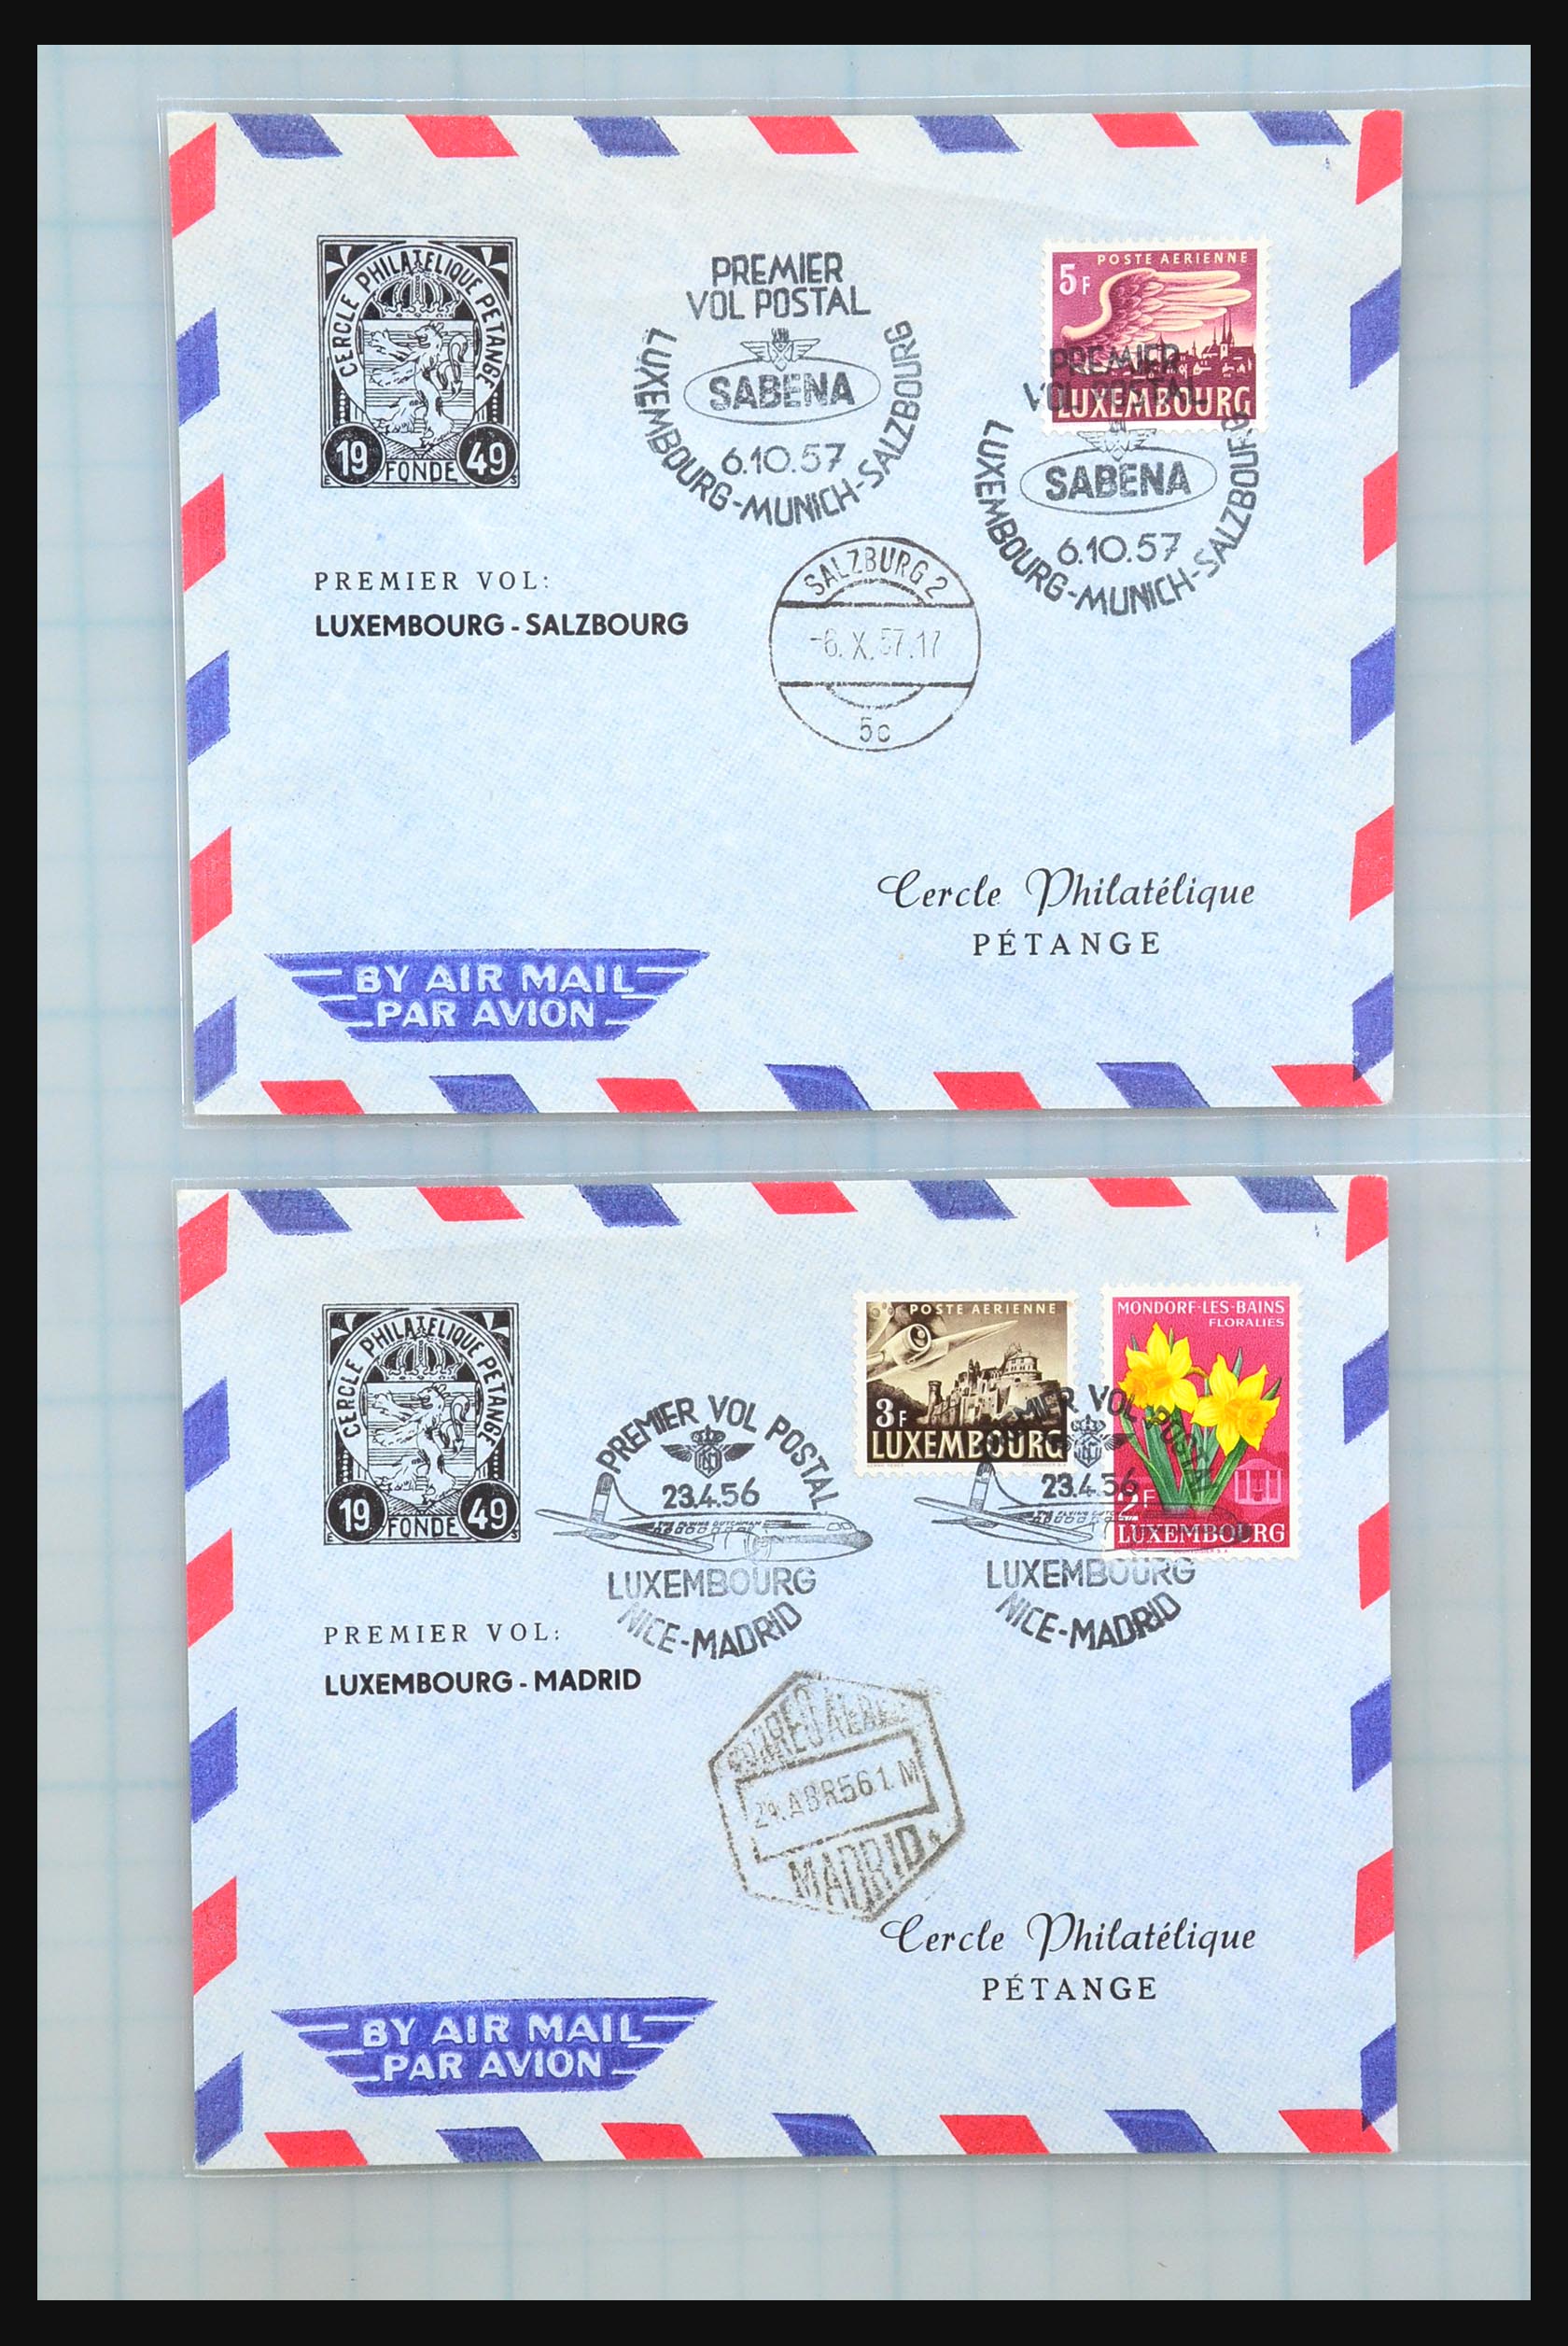 31358 070 - 31358 Portugal/Luxemburg/Greece covers 1880-1960.